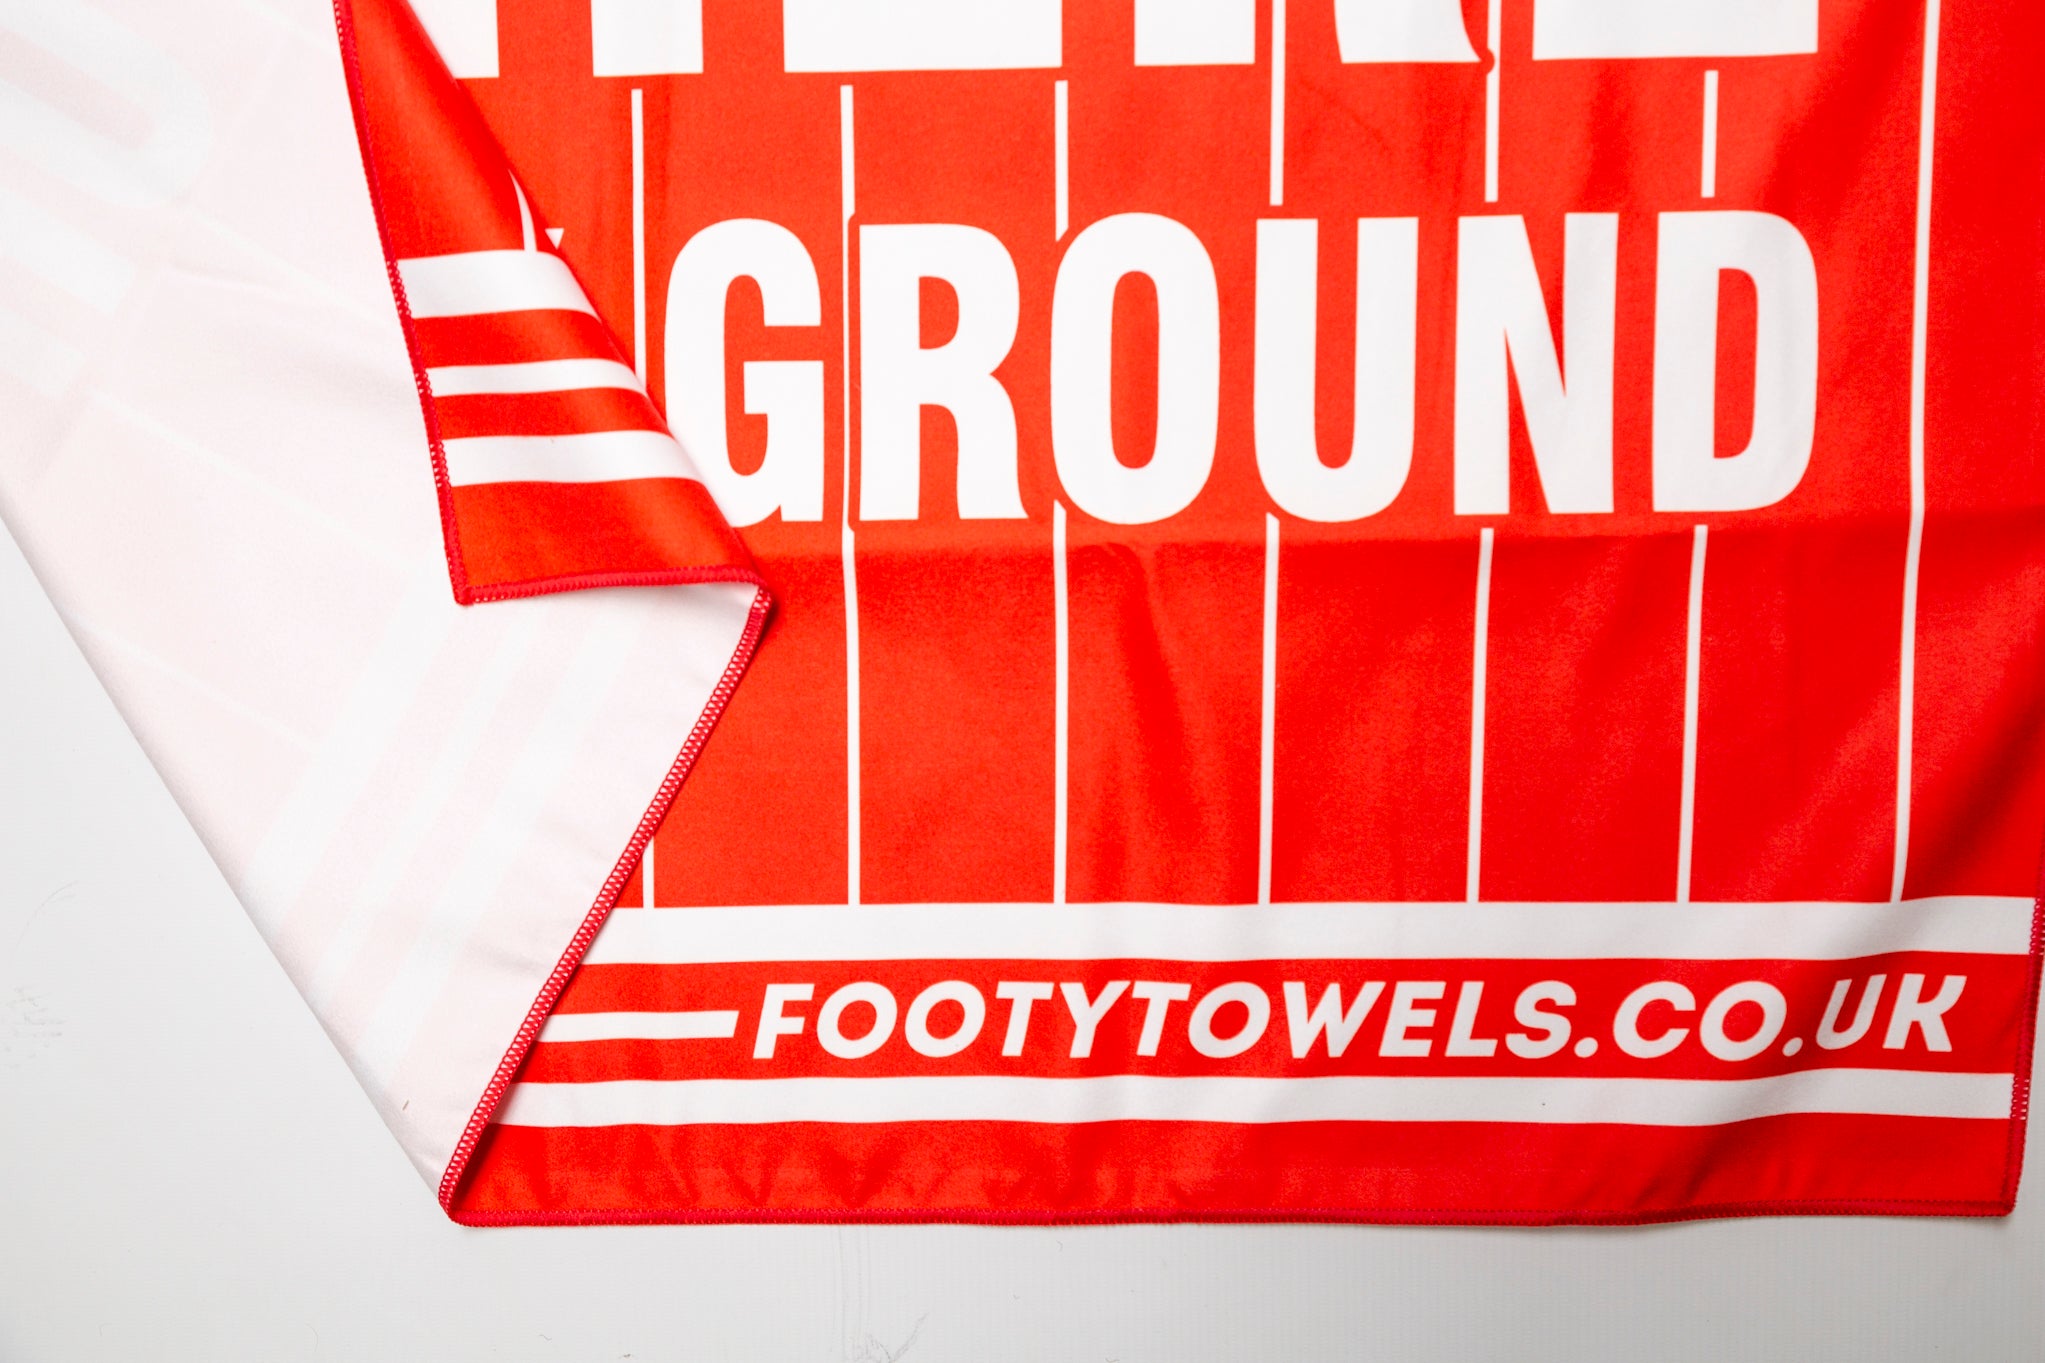 Nottingham Forest - City Ground – Footy Towels